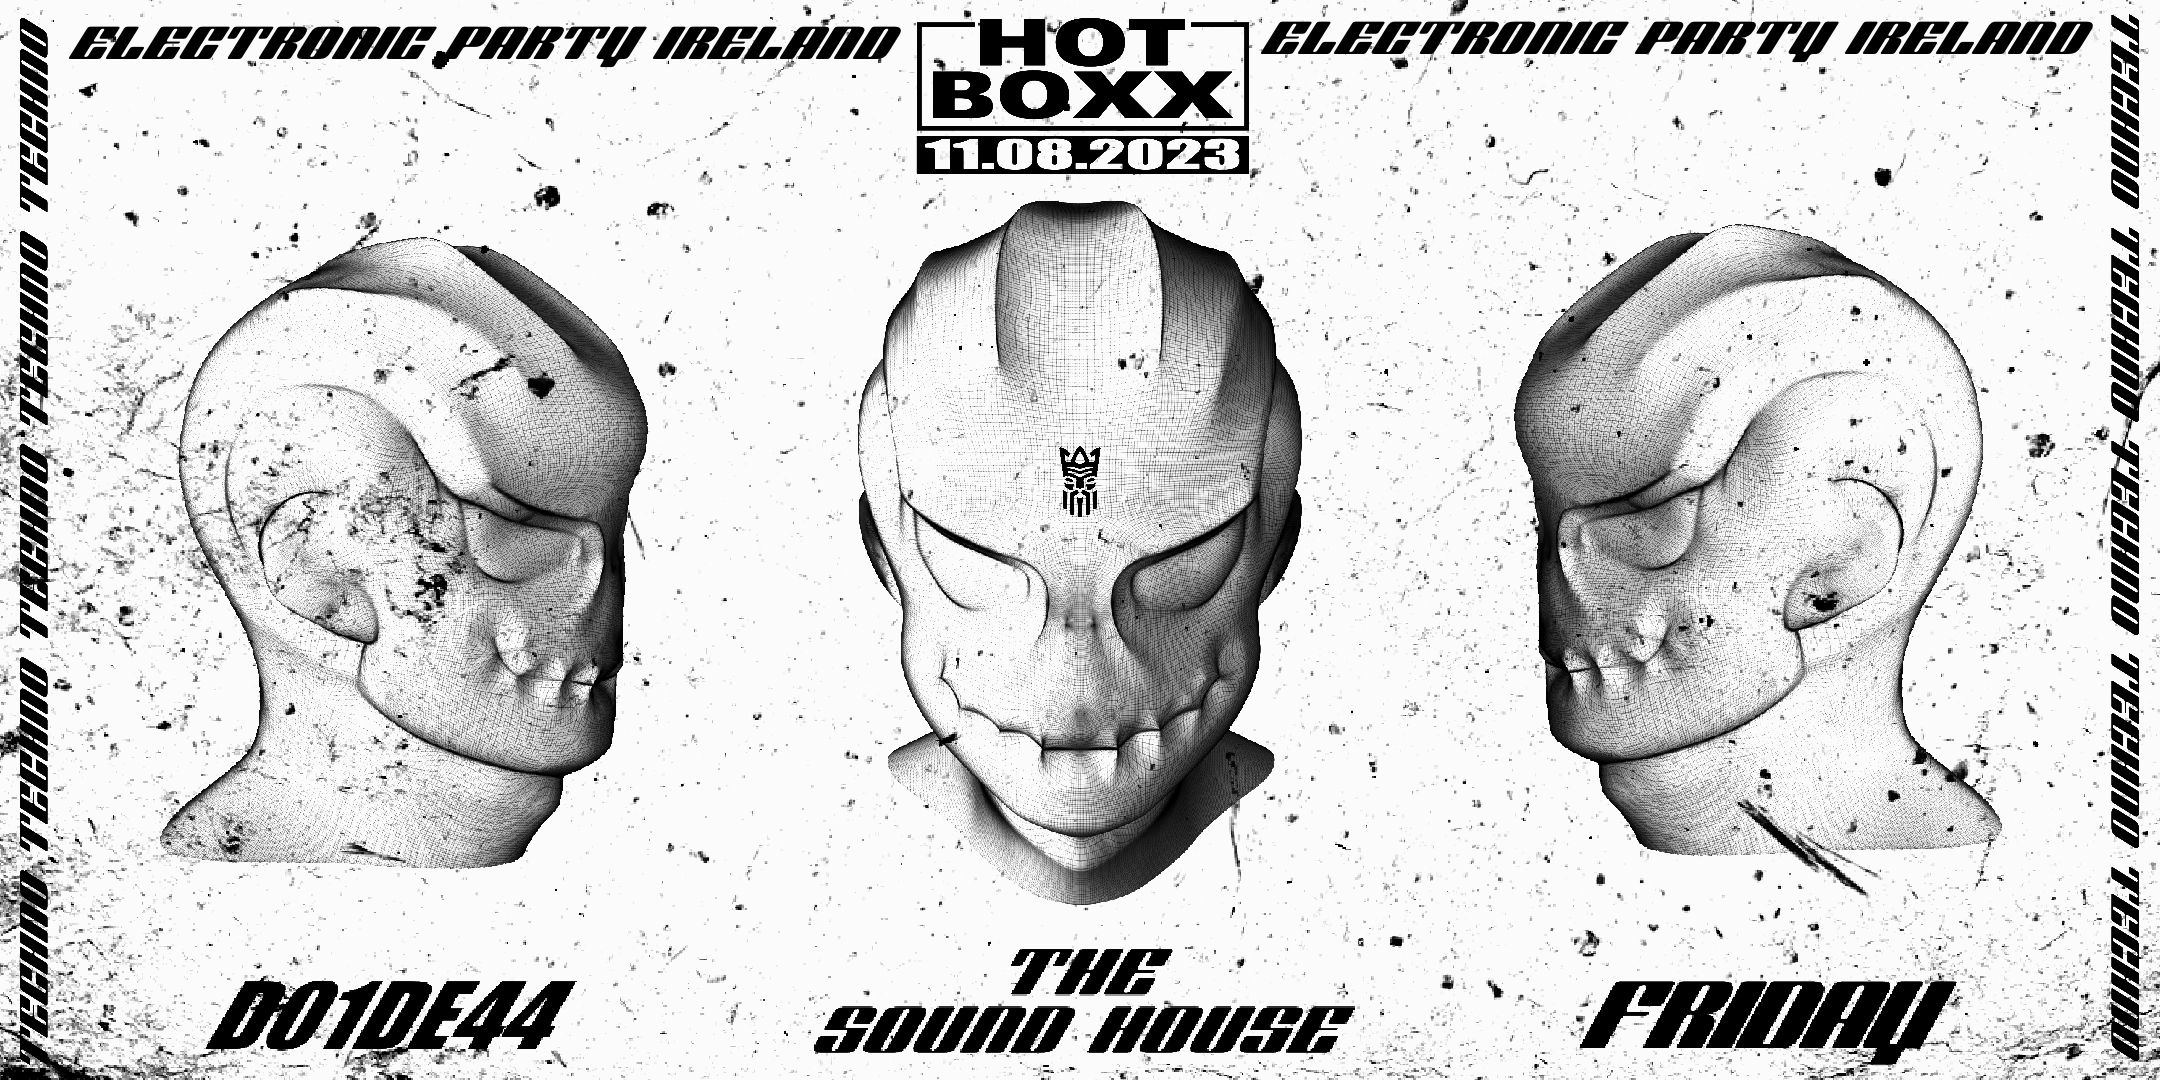 Techno Cage Rave: HOTBOXX - Aug 11th - フライヤー裏